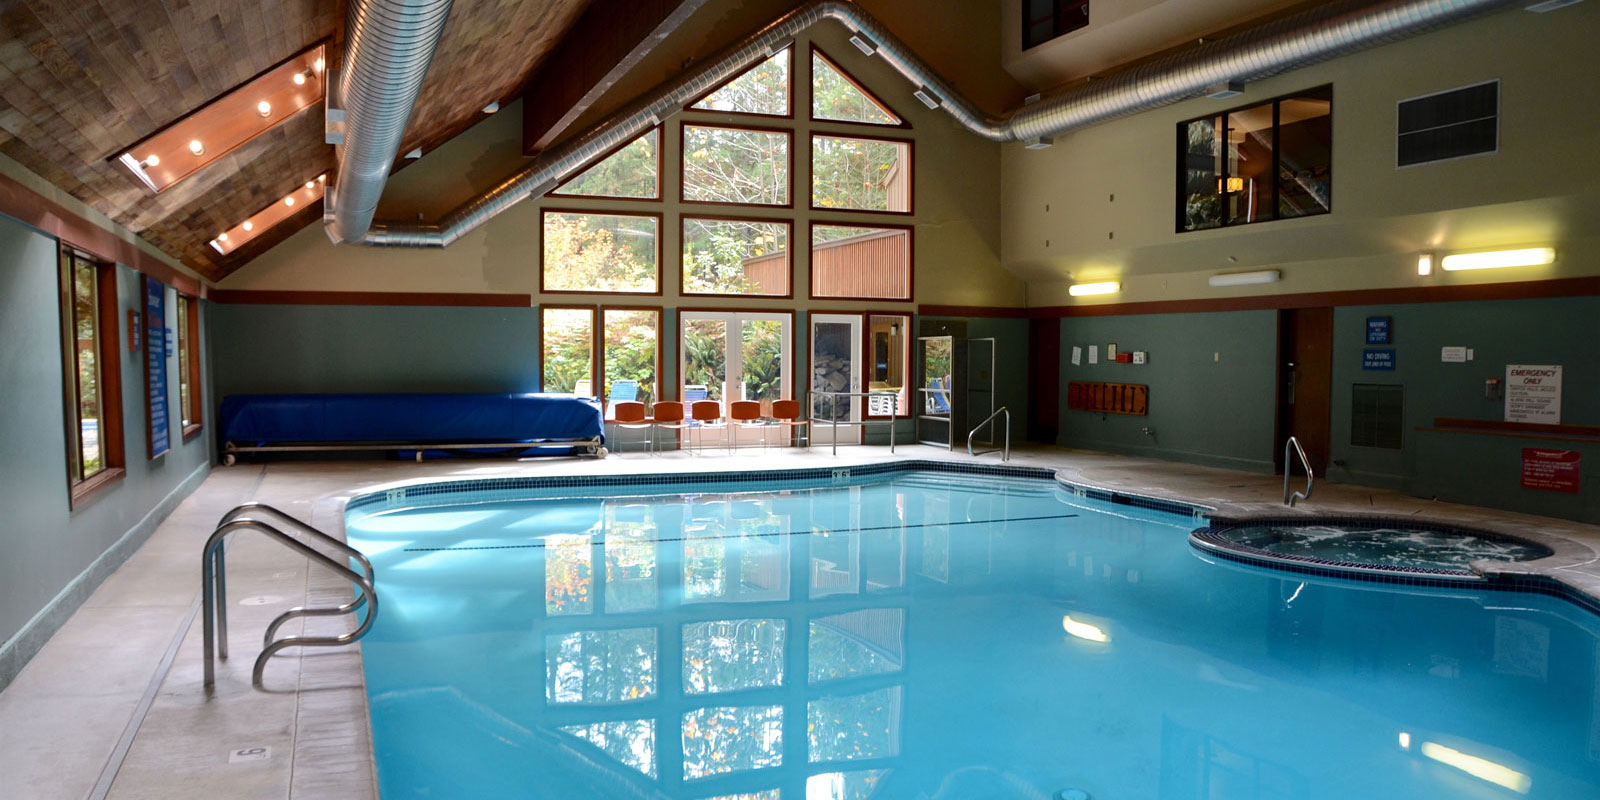 The South Wall of the Clubhouse swimming pool